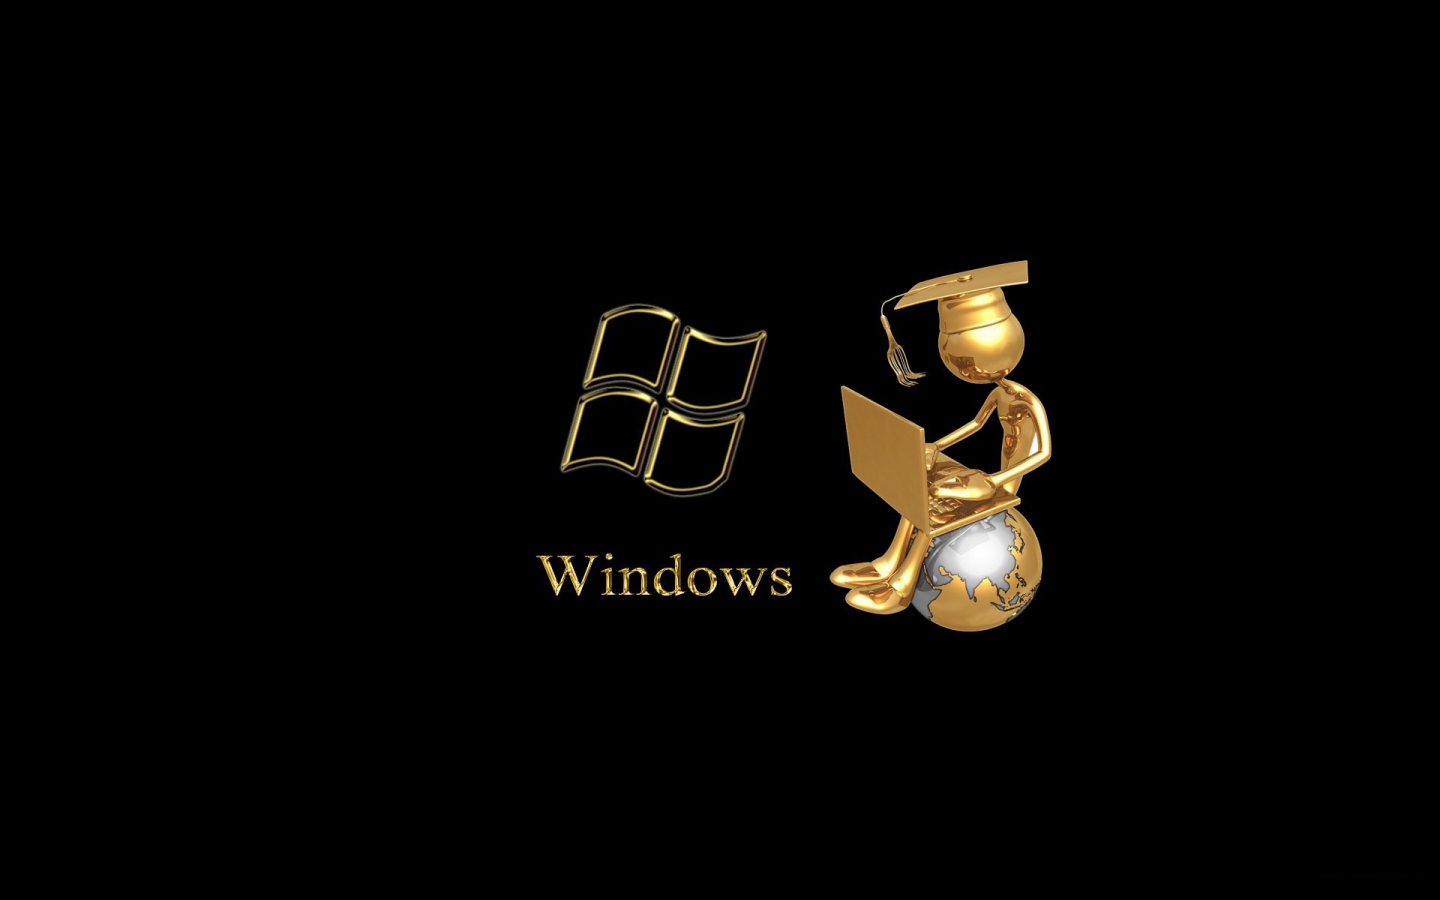 Windows Gold for 1440 x 900 widescreen resolution